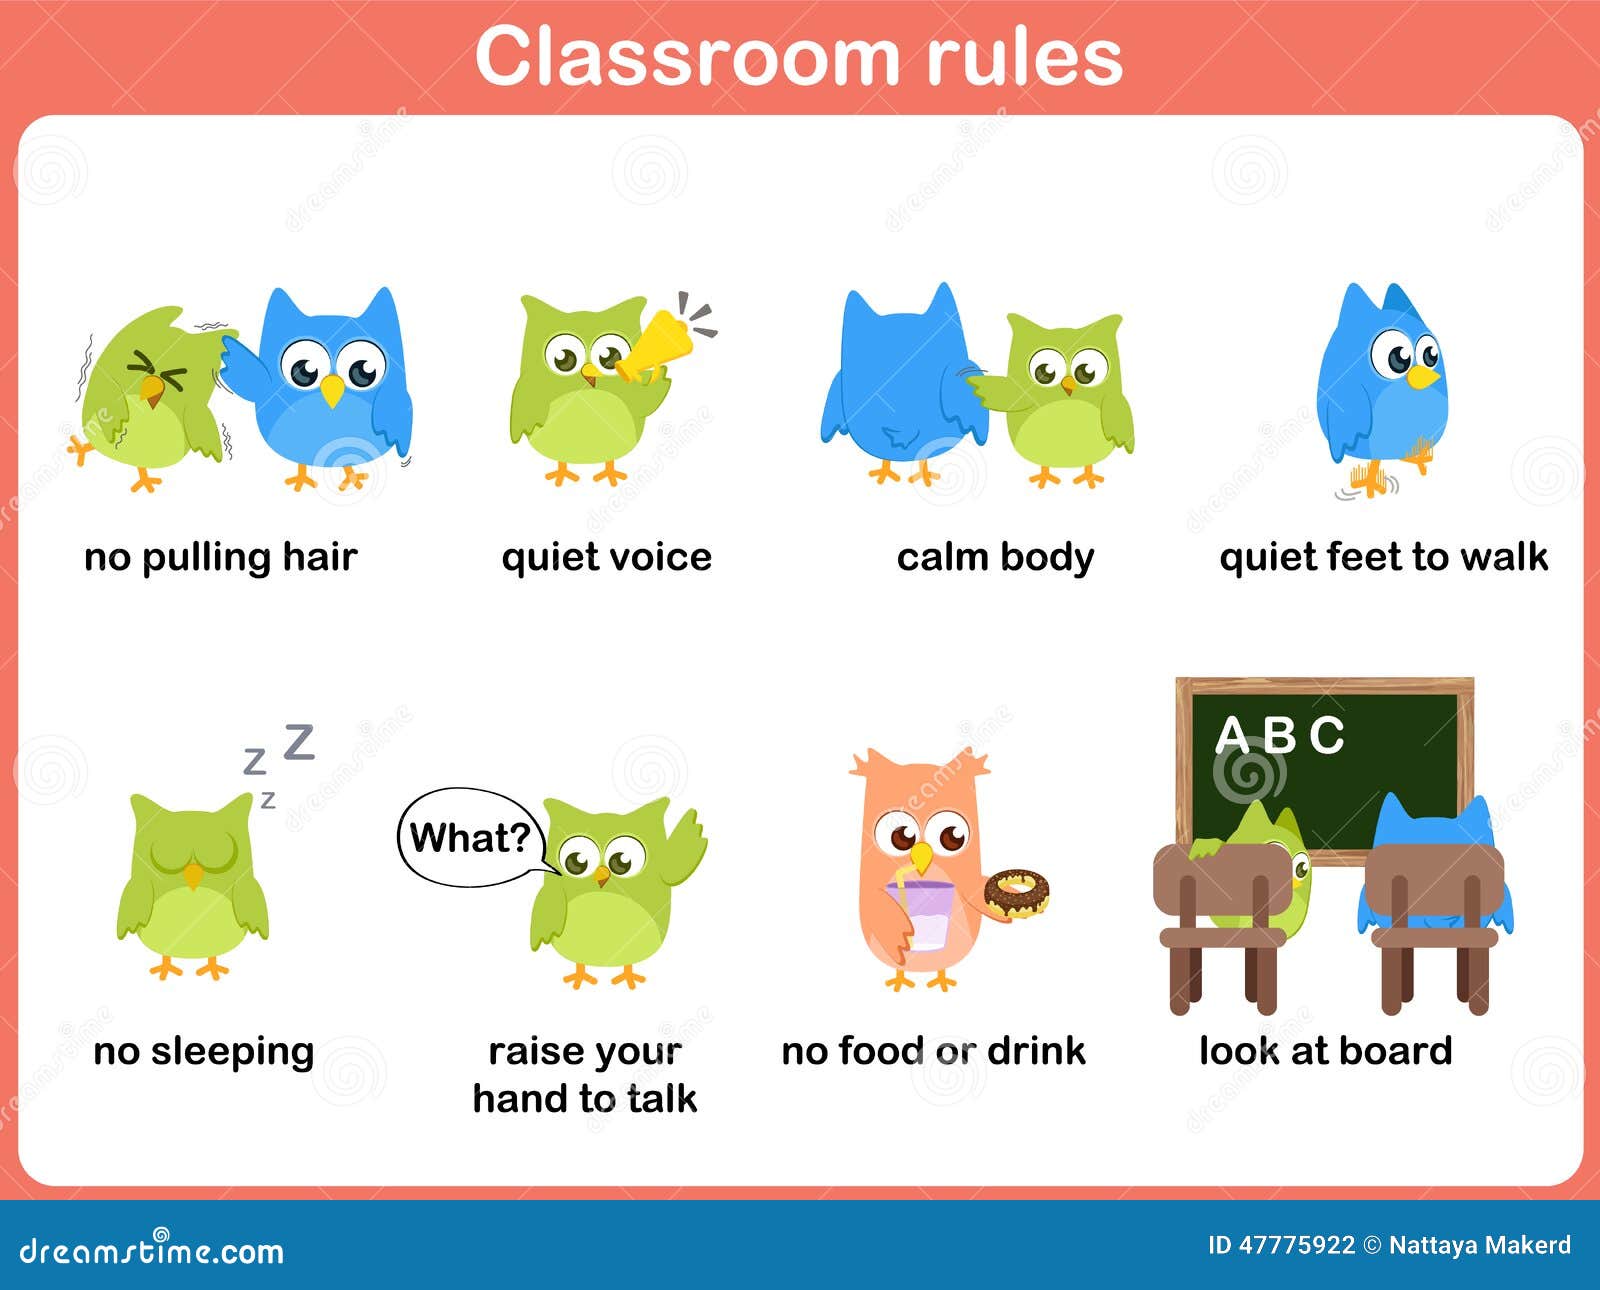 classroom rules for kids